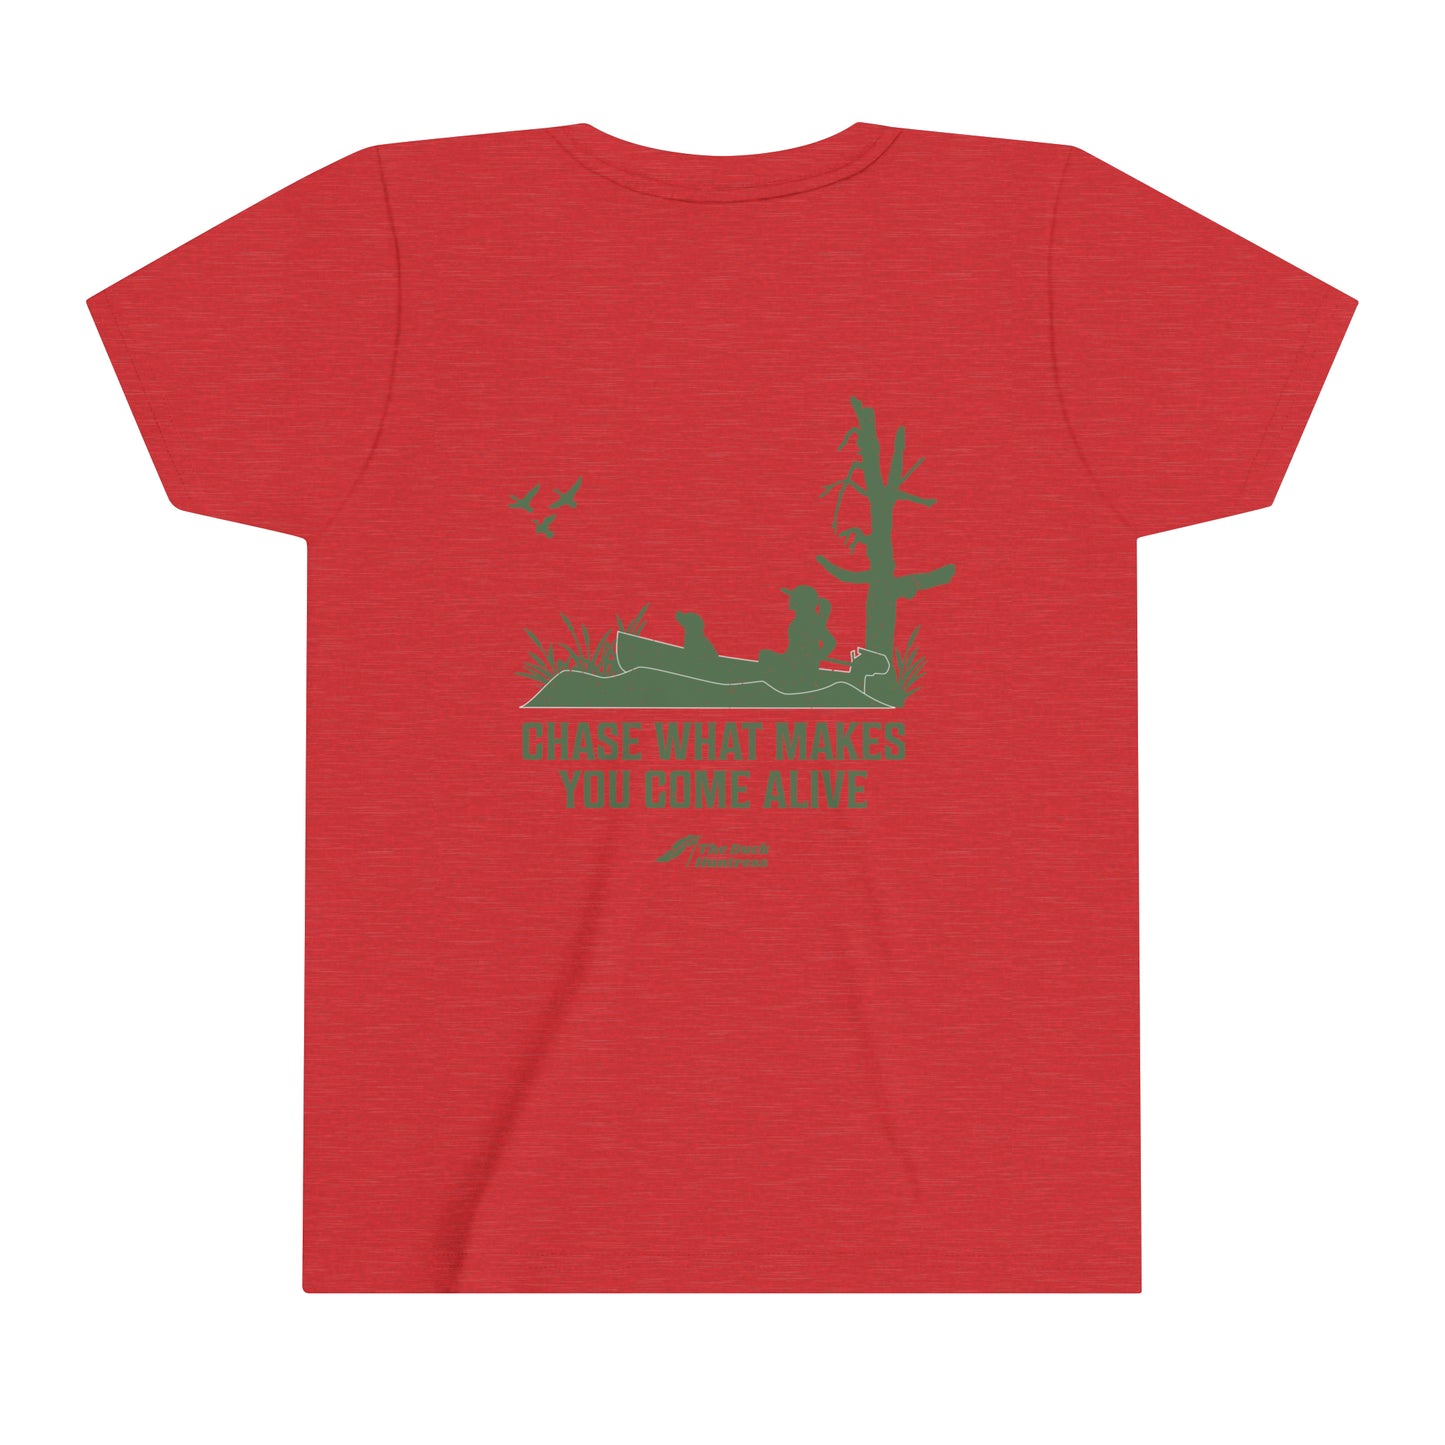 Youth Chase Tee (Olive Ink Versions)